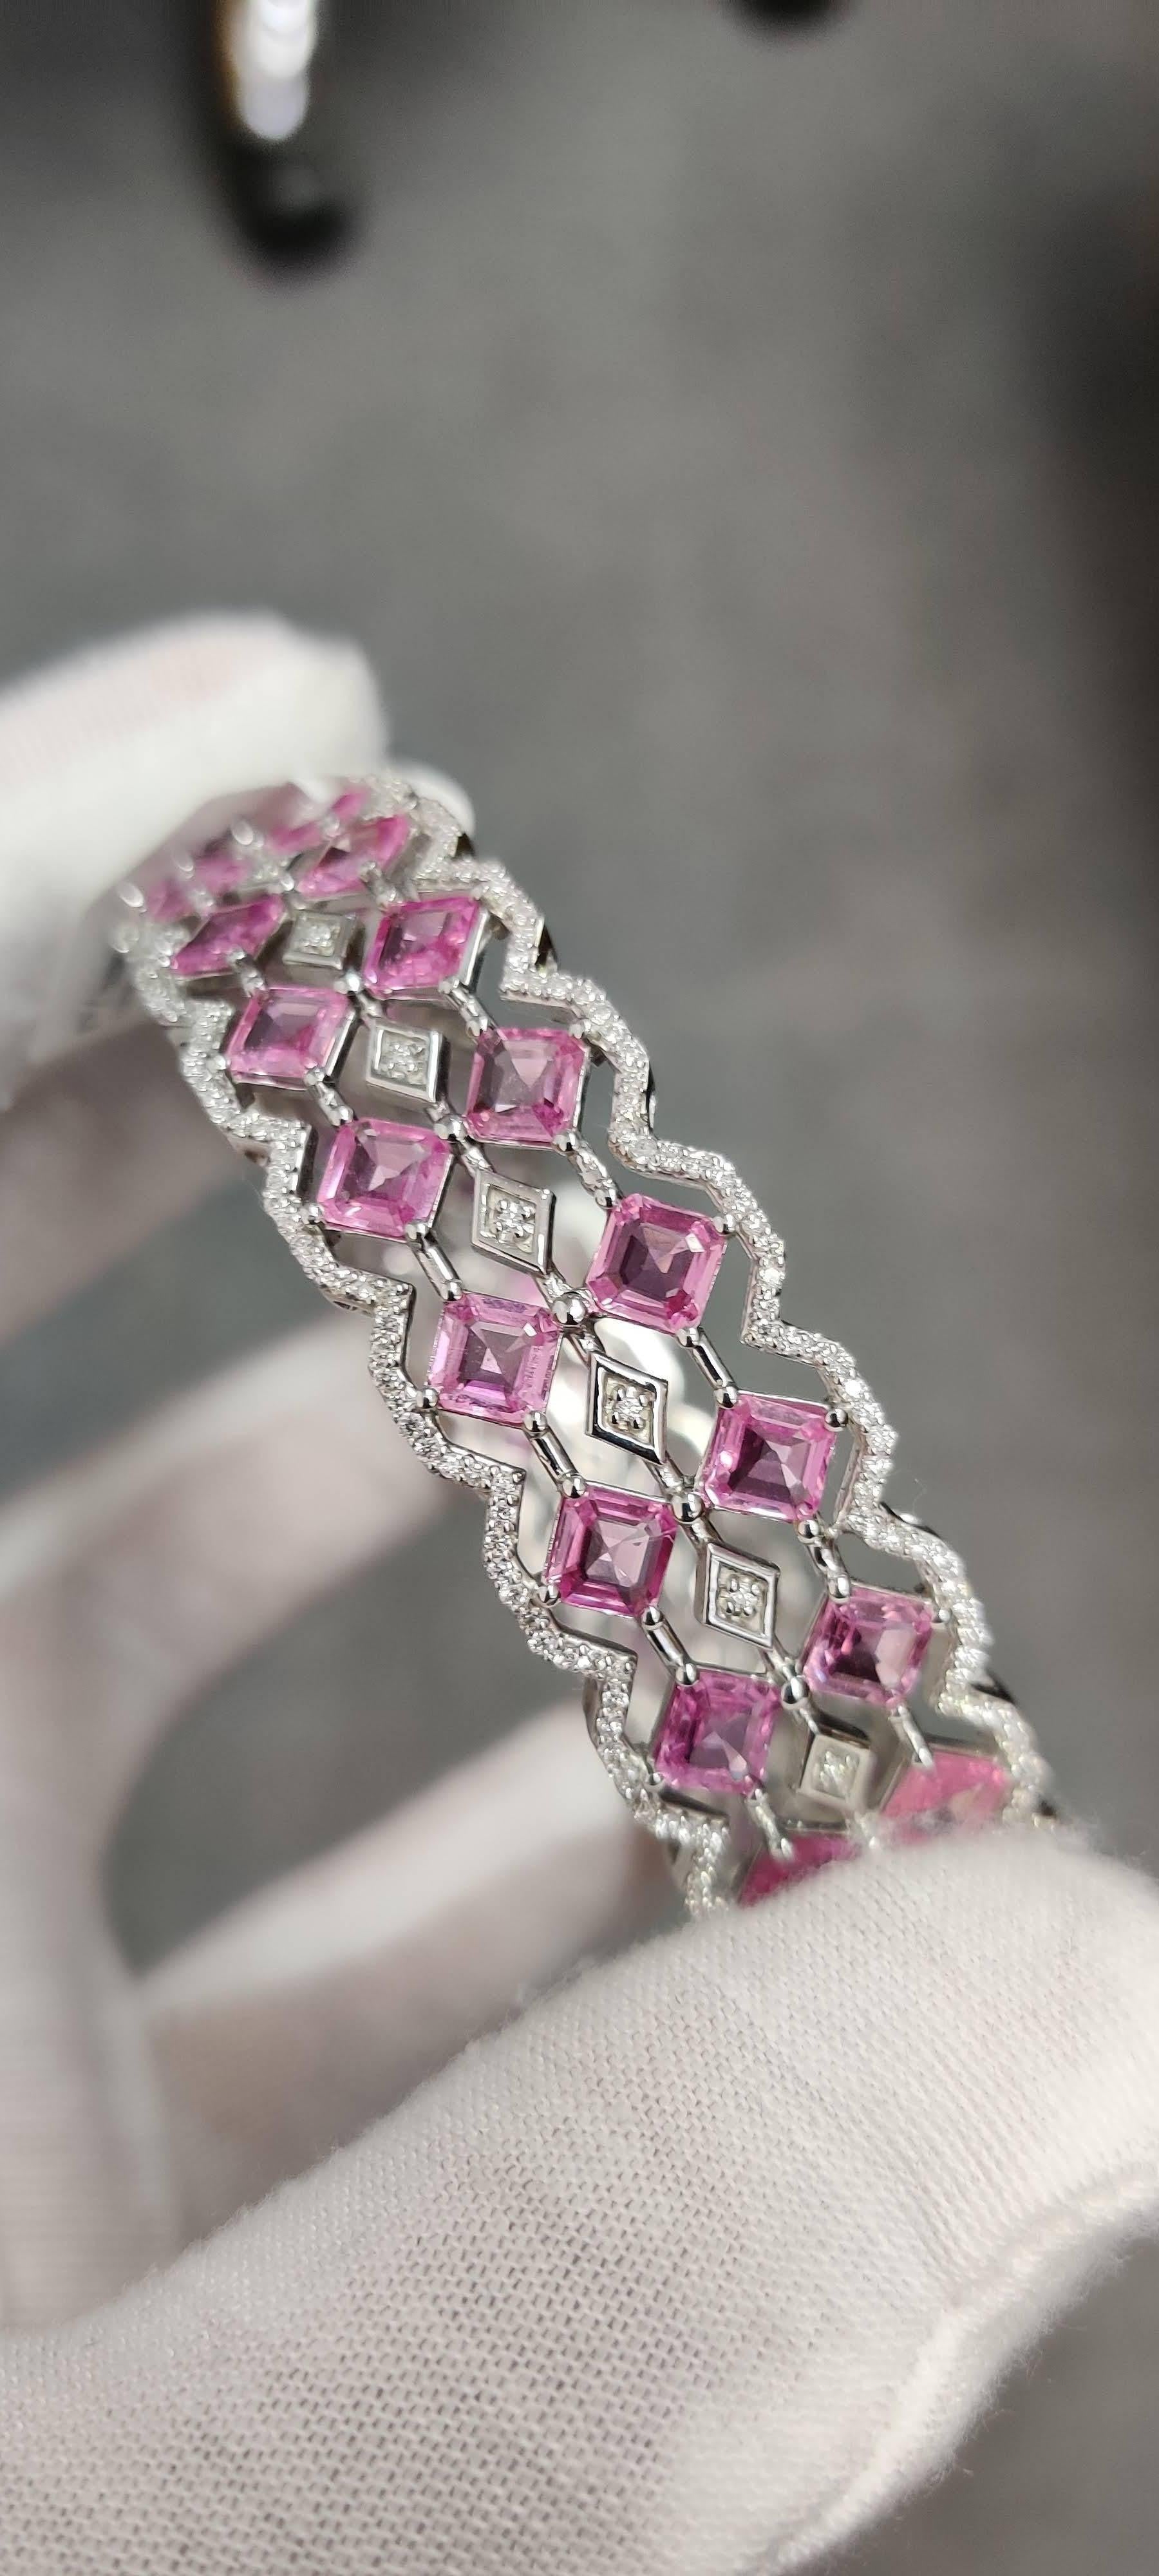 26.96 Ct Pink Sapphires & Diamonds Studded Statement Bangle in 18K White Gold For Sale 5